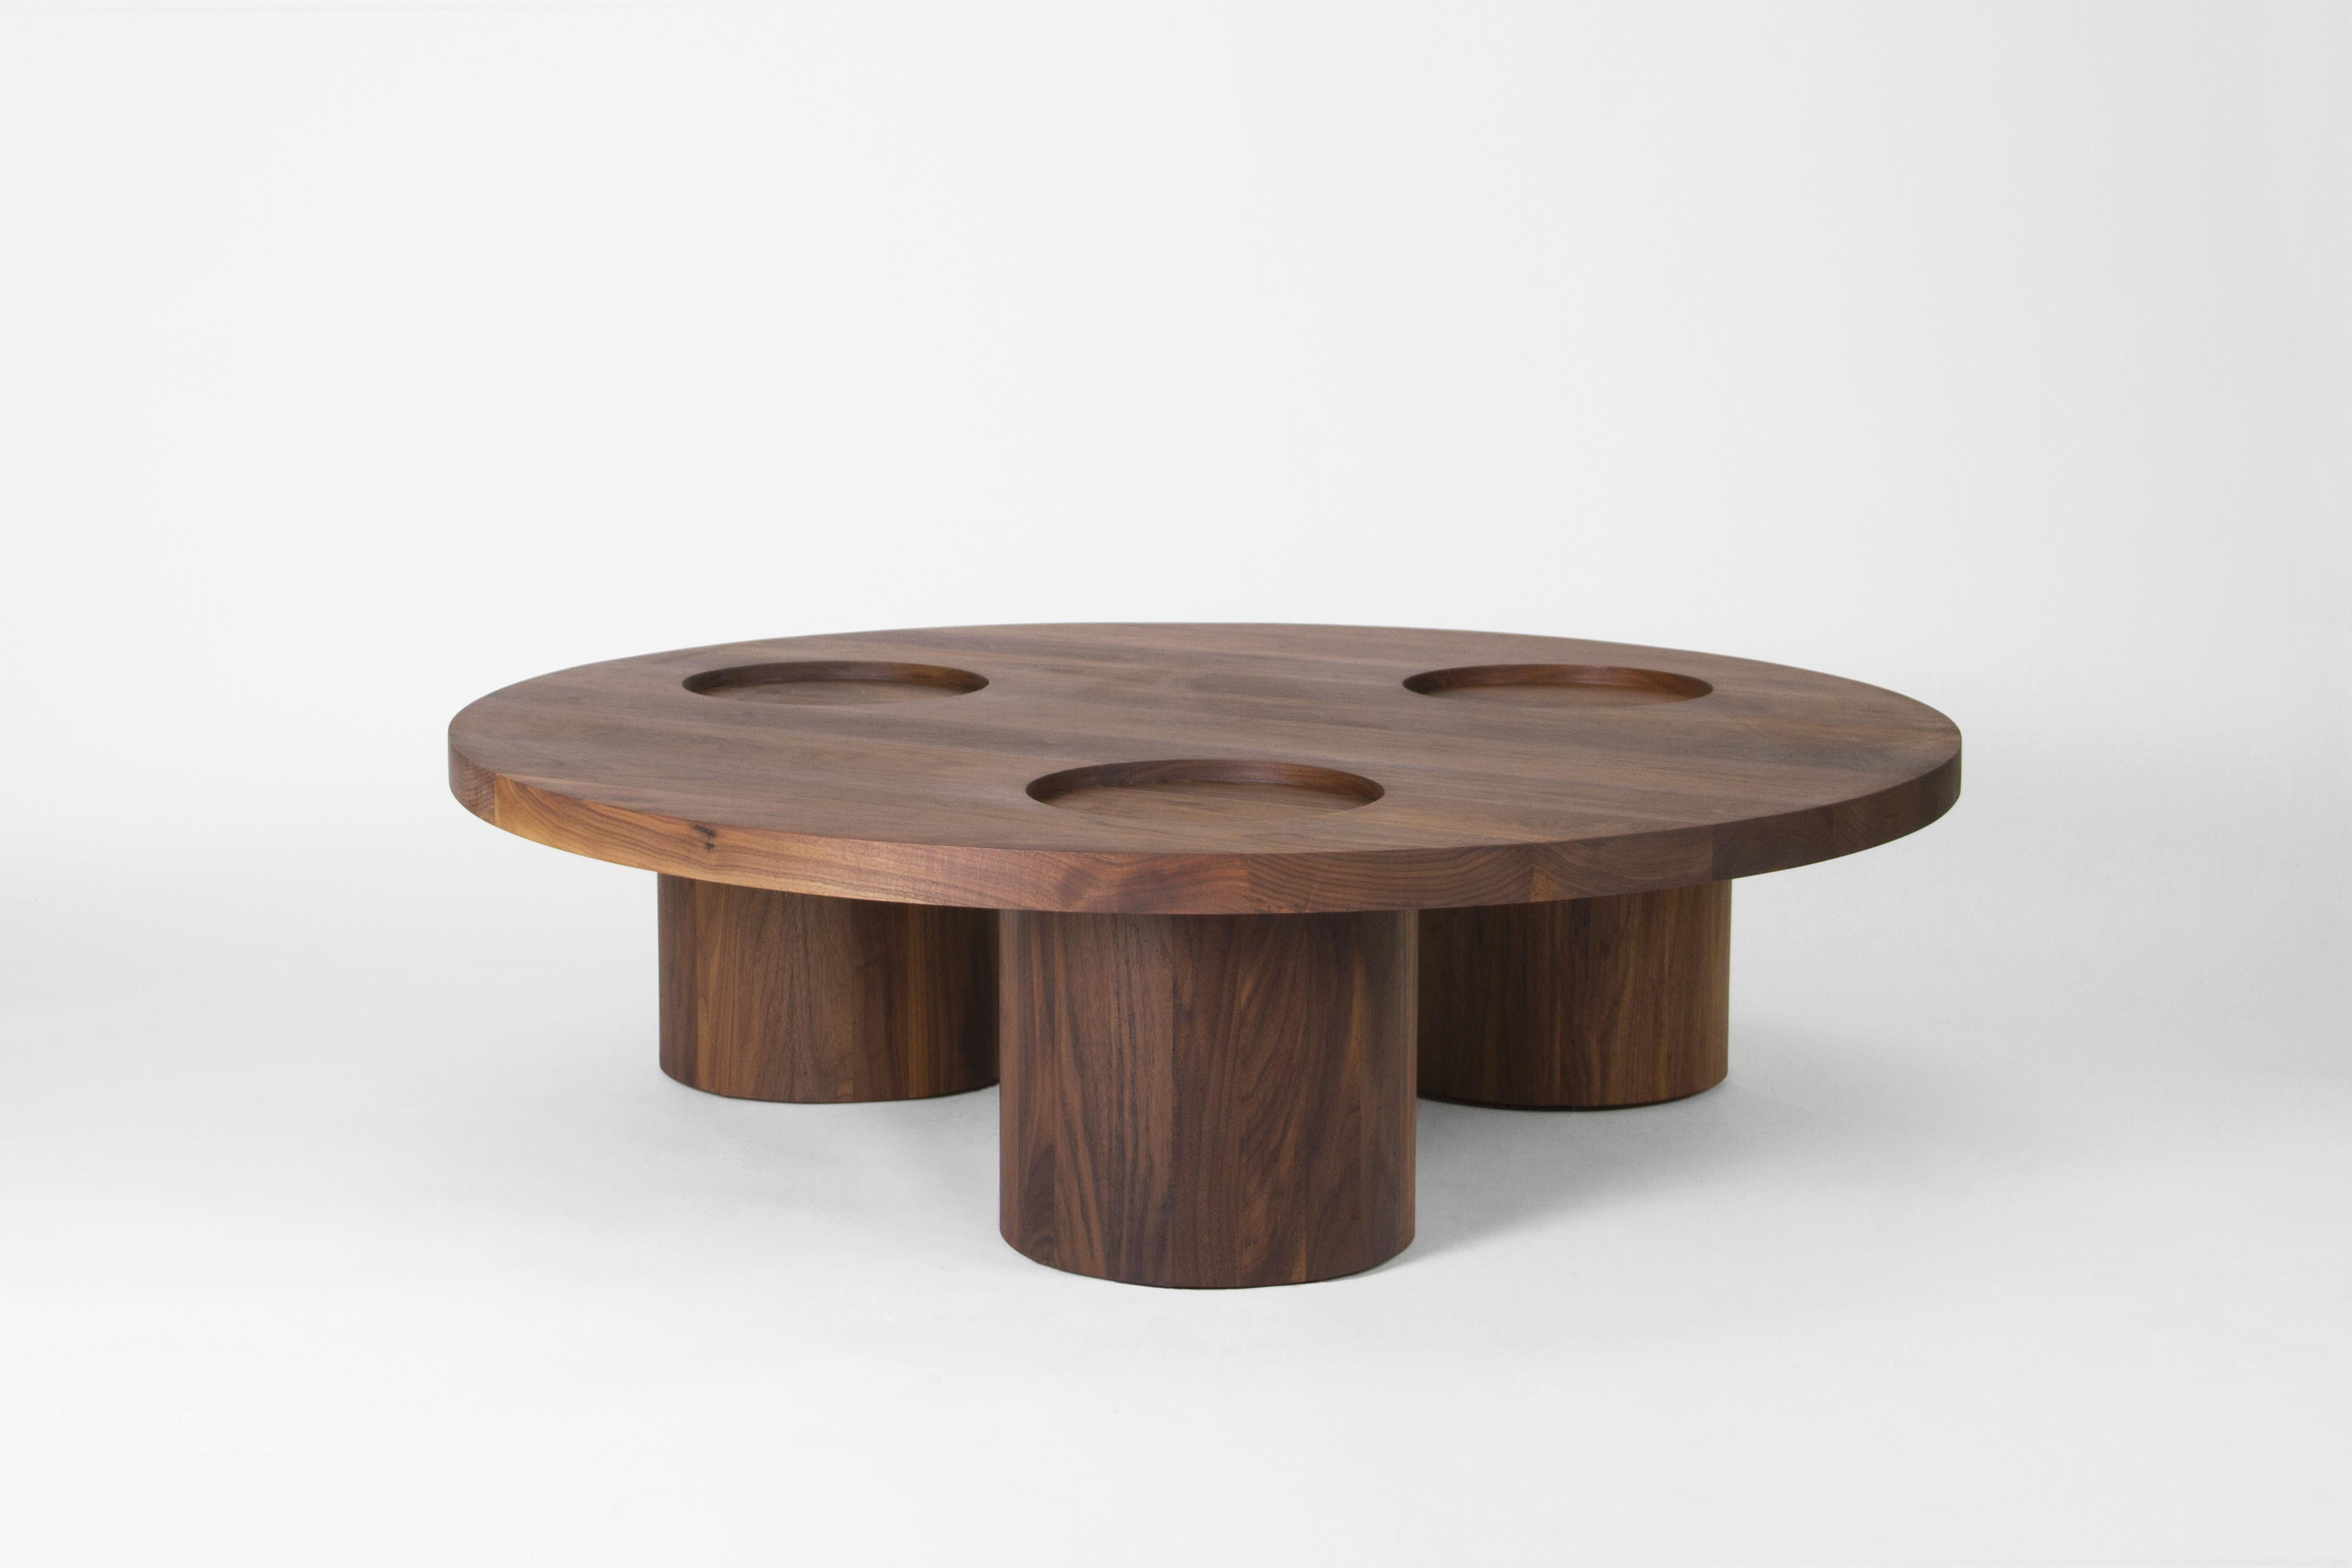 Vassoio coffee table in solid wood with circular insets and wide cylindrical legs.

Available in solid walnut, white oak, red oak, maple, ash or black stained ash.

Finished with a clear protective coating.

Designed and handmade in Los